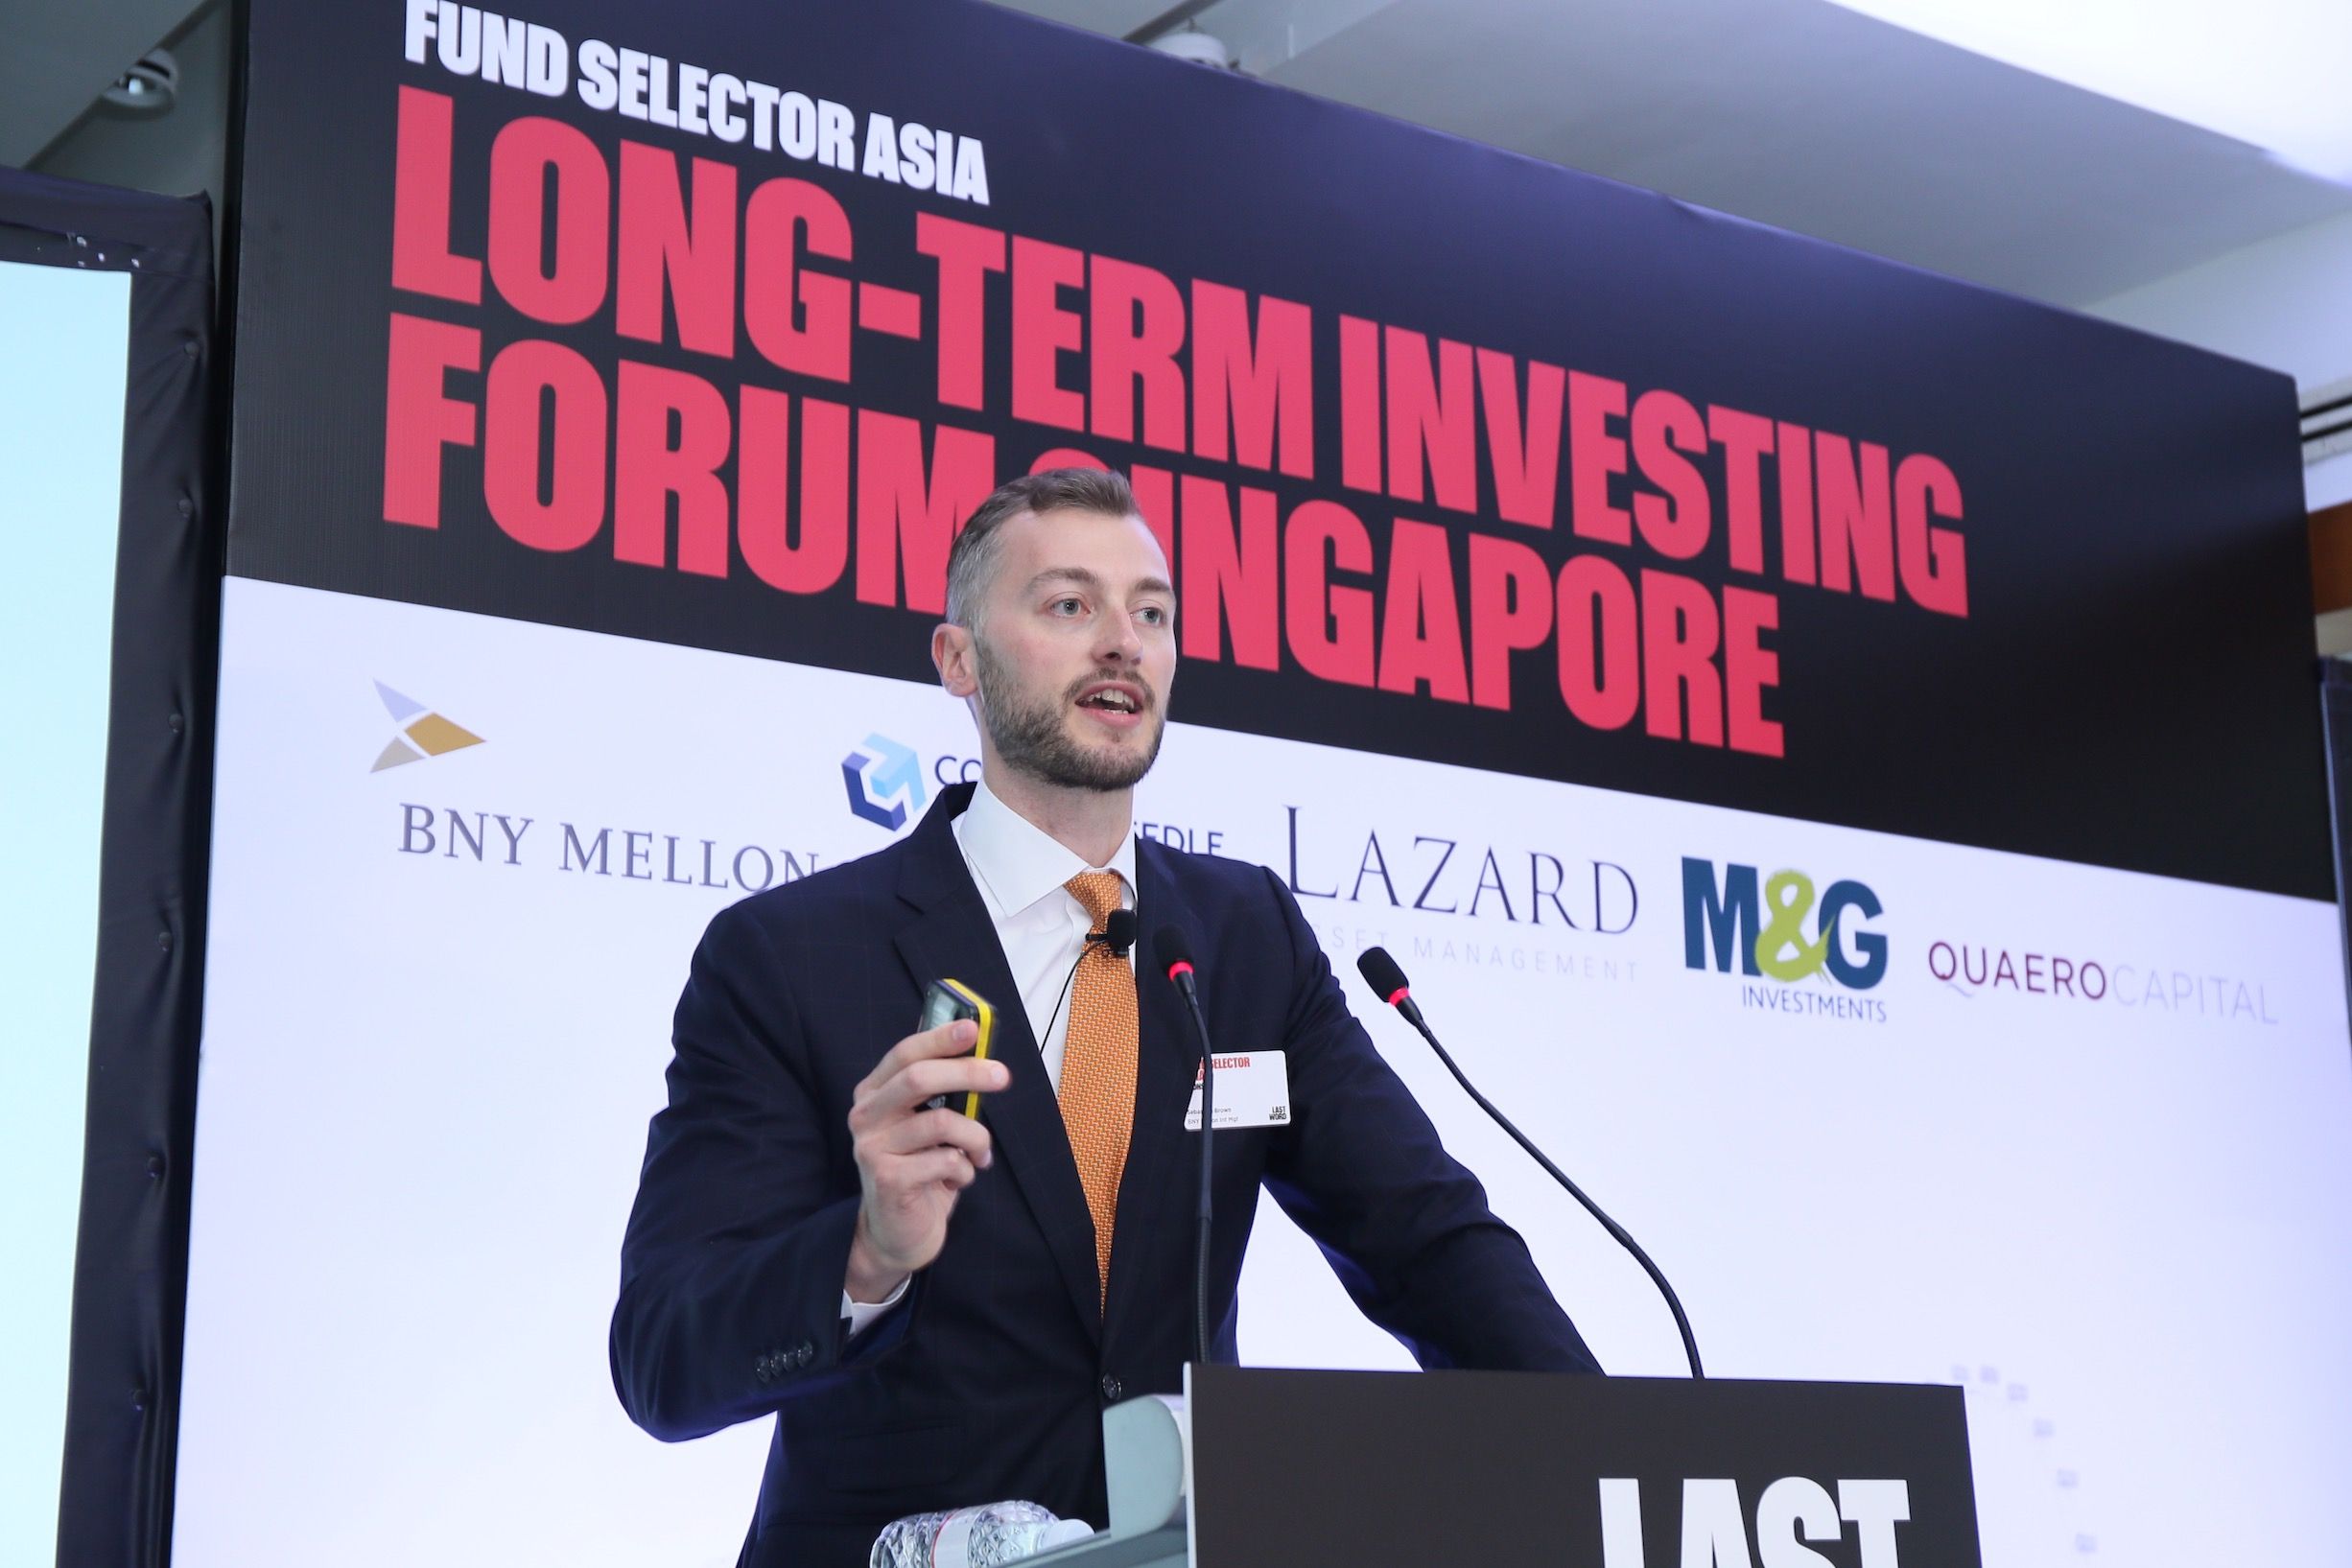 Presentation by Sebastien Brown, investment specialist, BNY Mellon Investment Management